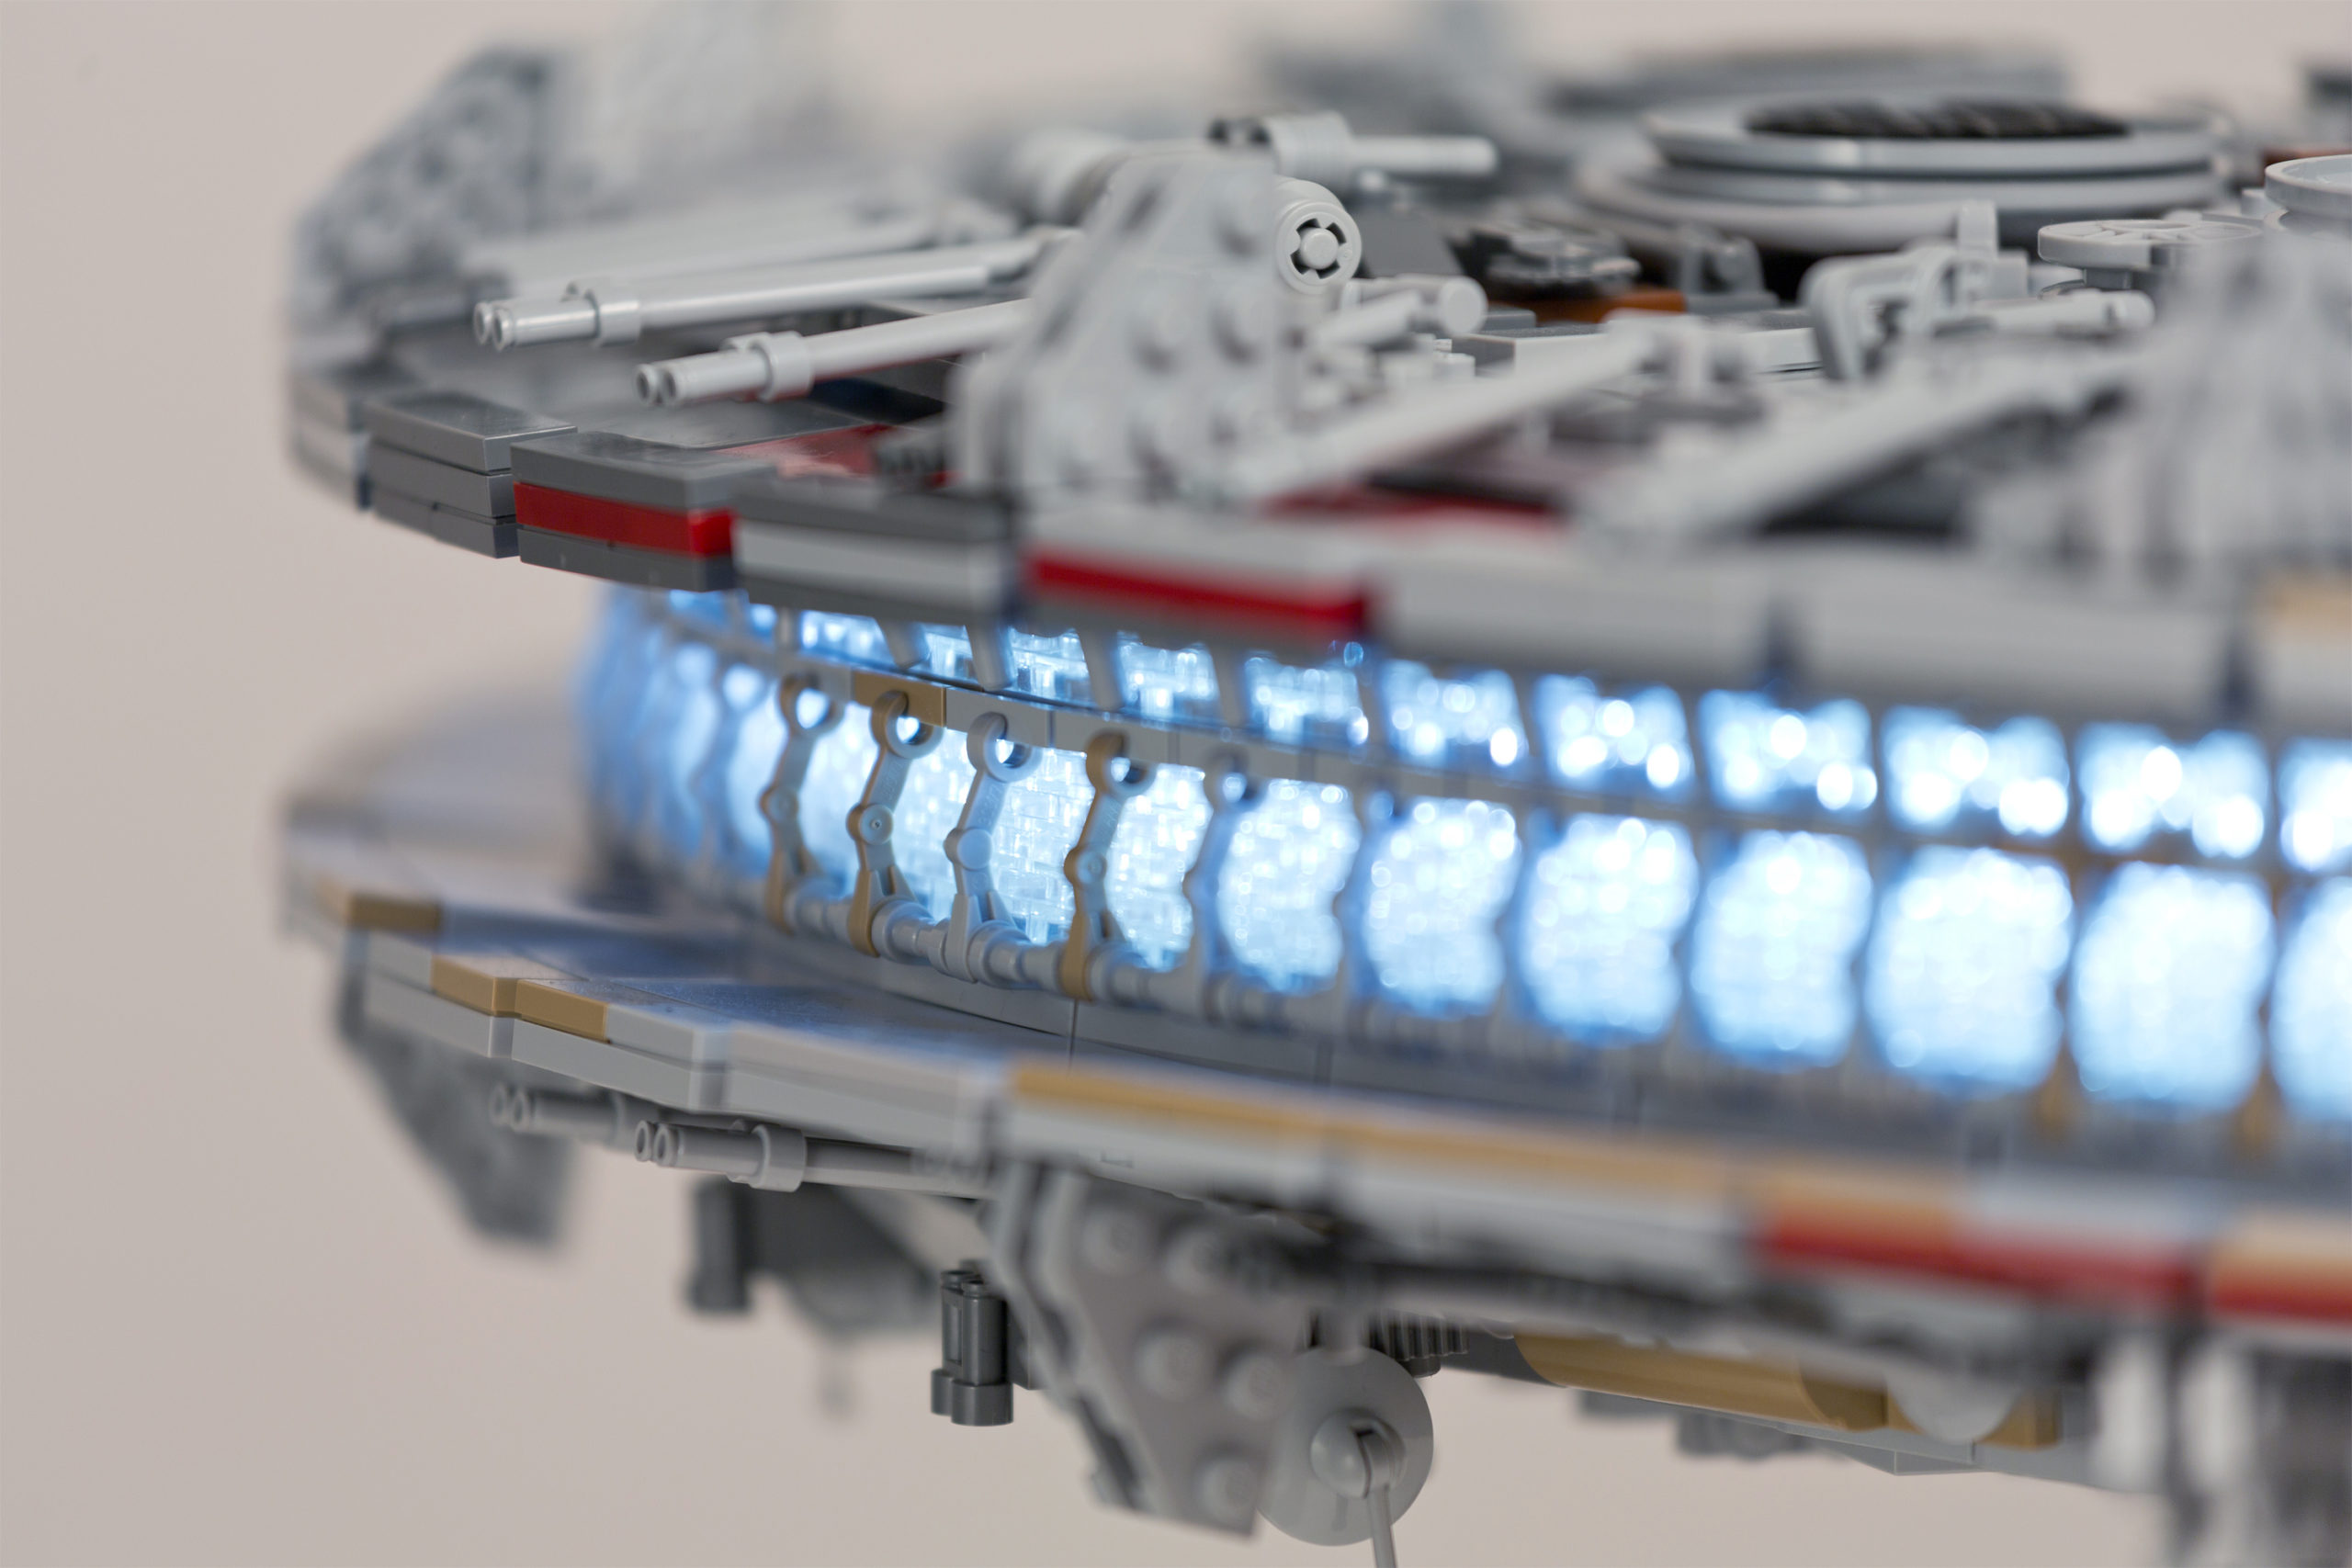 Star Wars Fan Spends A Year Building The Best LEGO Millennium Falcon Ever